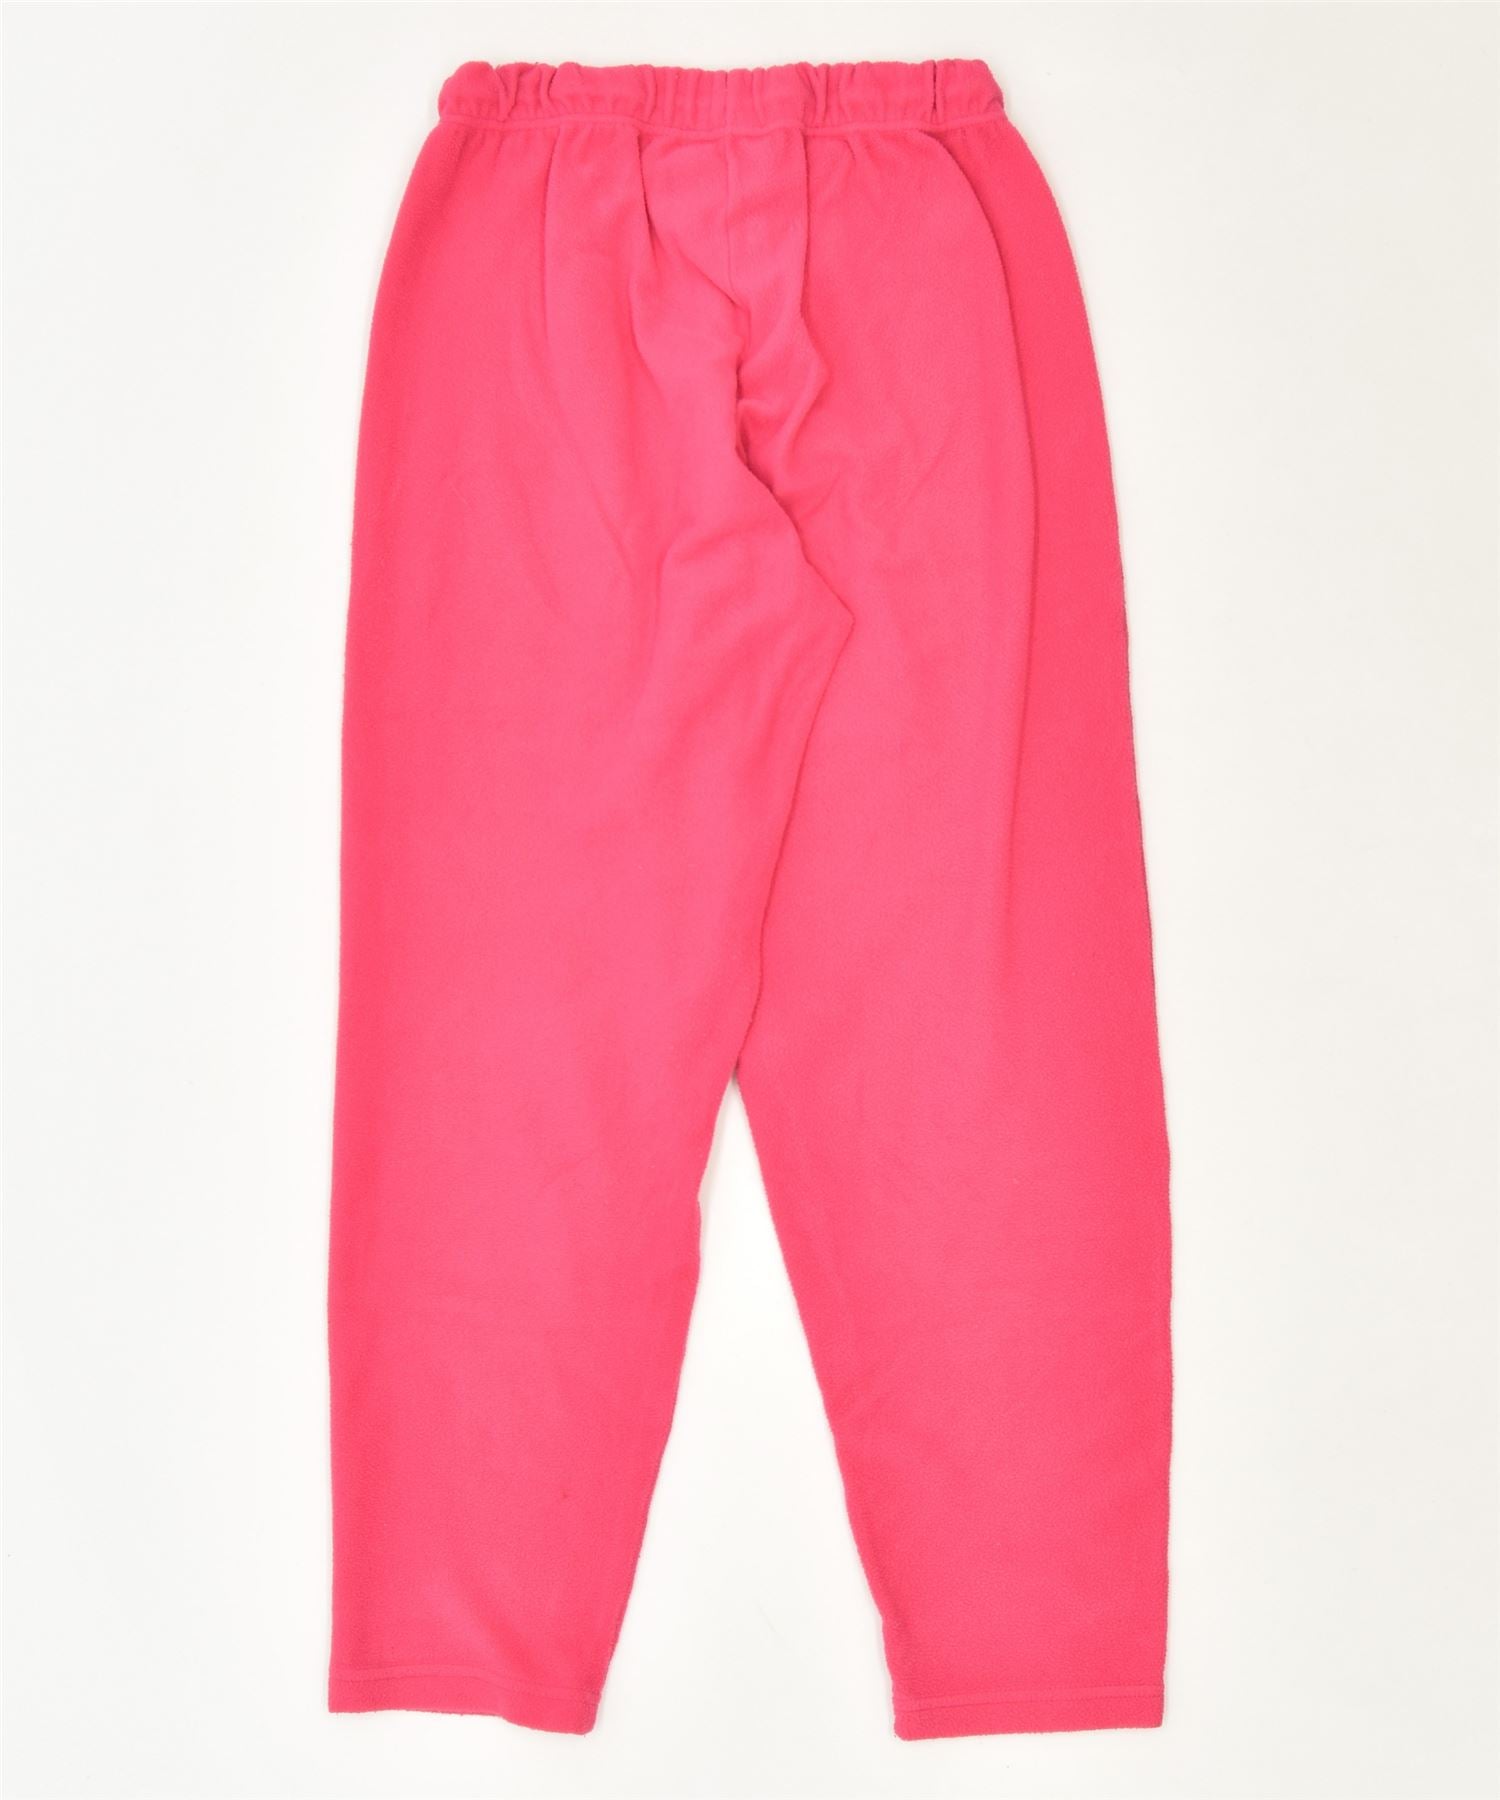 KAPPA Womens Fleece Tracksuit Trousers Small Pink Polyester Sports, Vintage & Second-Hand Clothing Online